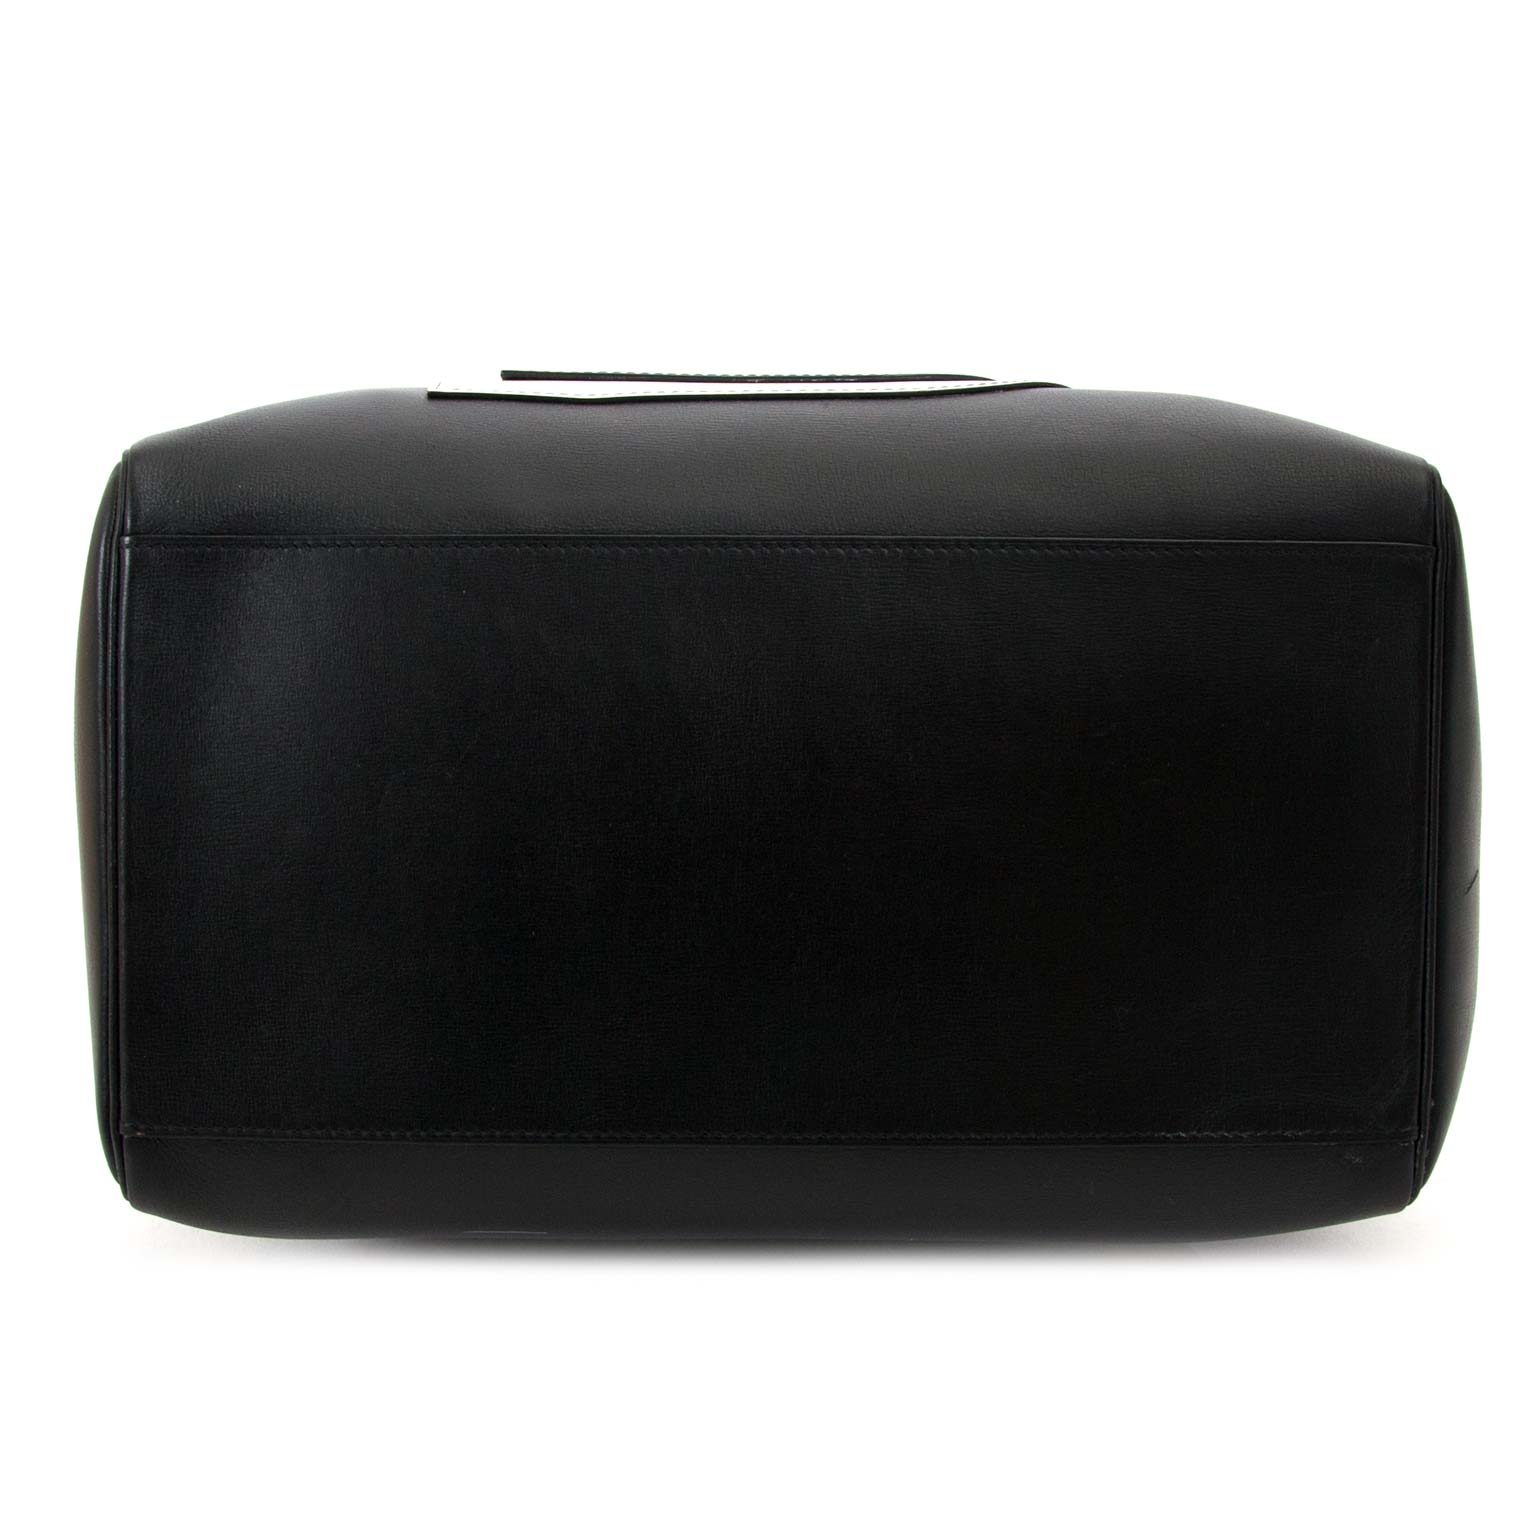 DELVAUX Louise clutch bag in black and white grained …